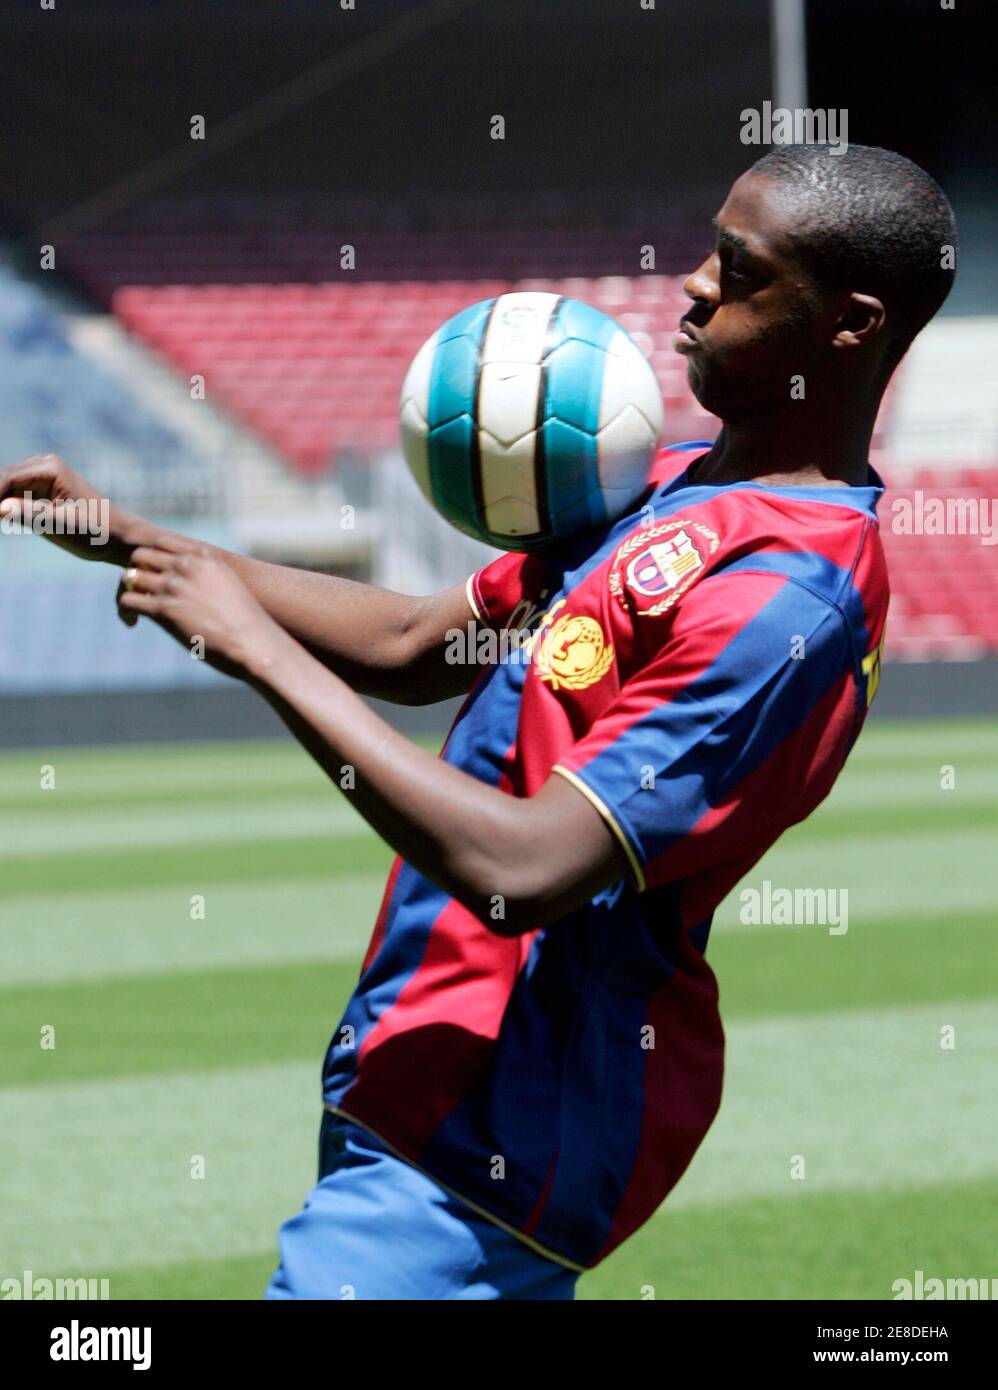 FC Barcelona's new signing Yaya Toure of Ivory Coast controls the ball  during his presentation at Nou Camp Stadium in Barcelona June 26, 2007.  REUTERS/Albert Gea (SPAIN Stock Photo - Alamy